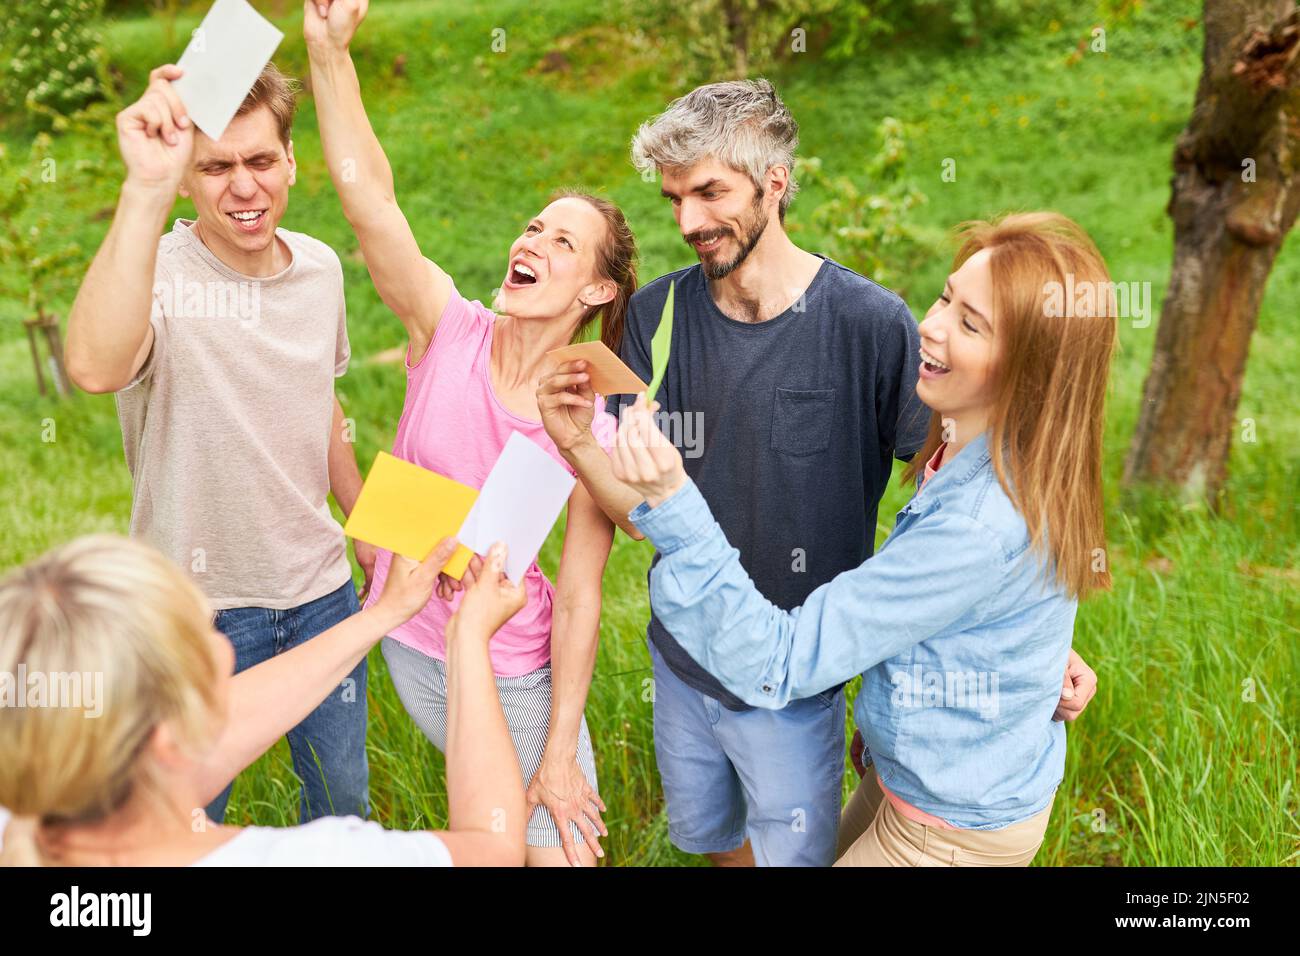 Group of people having fun in creative introductory game in team building workshop Stock Photo